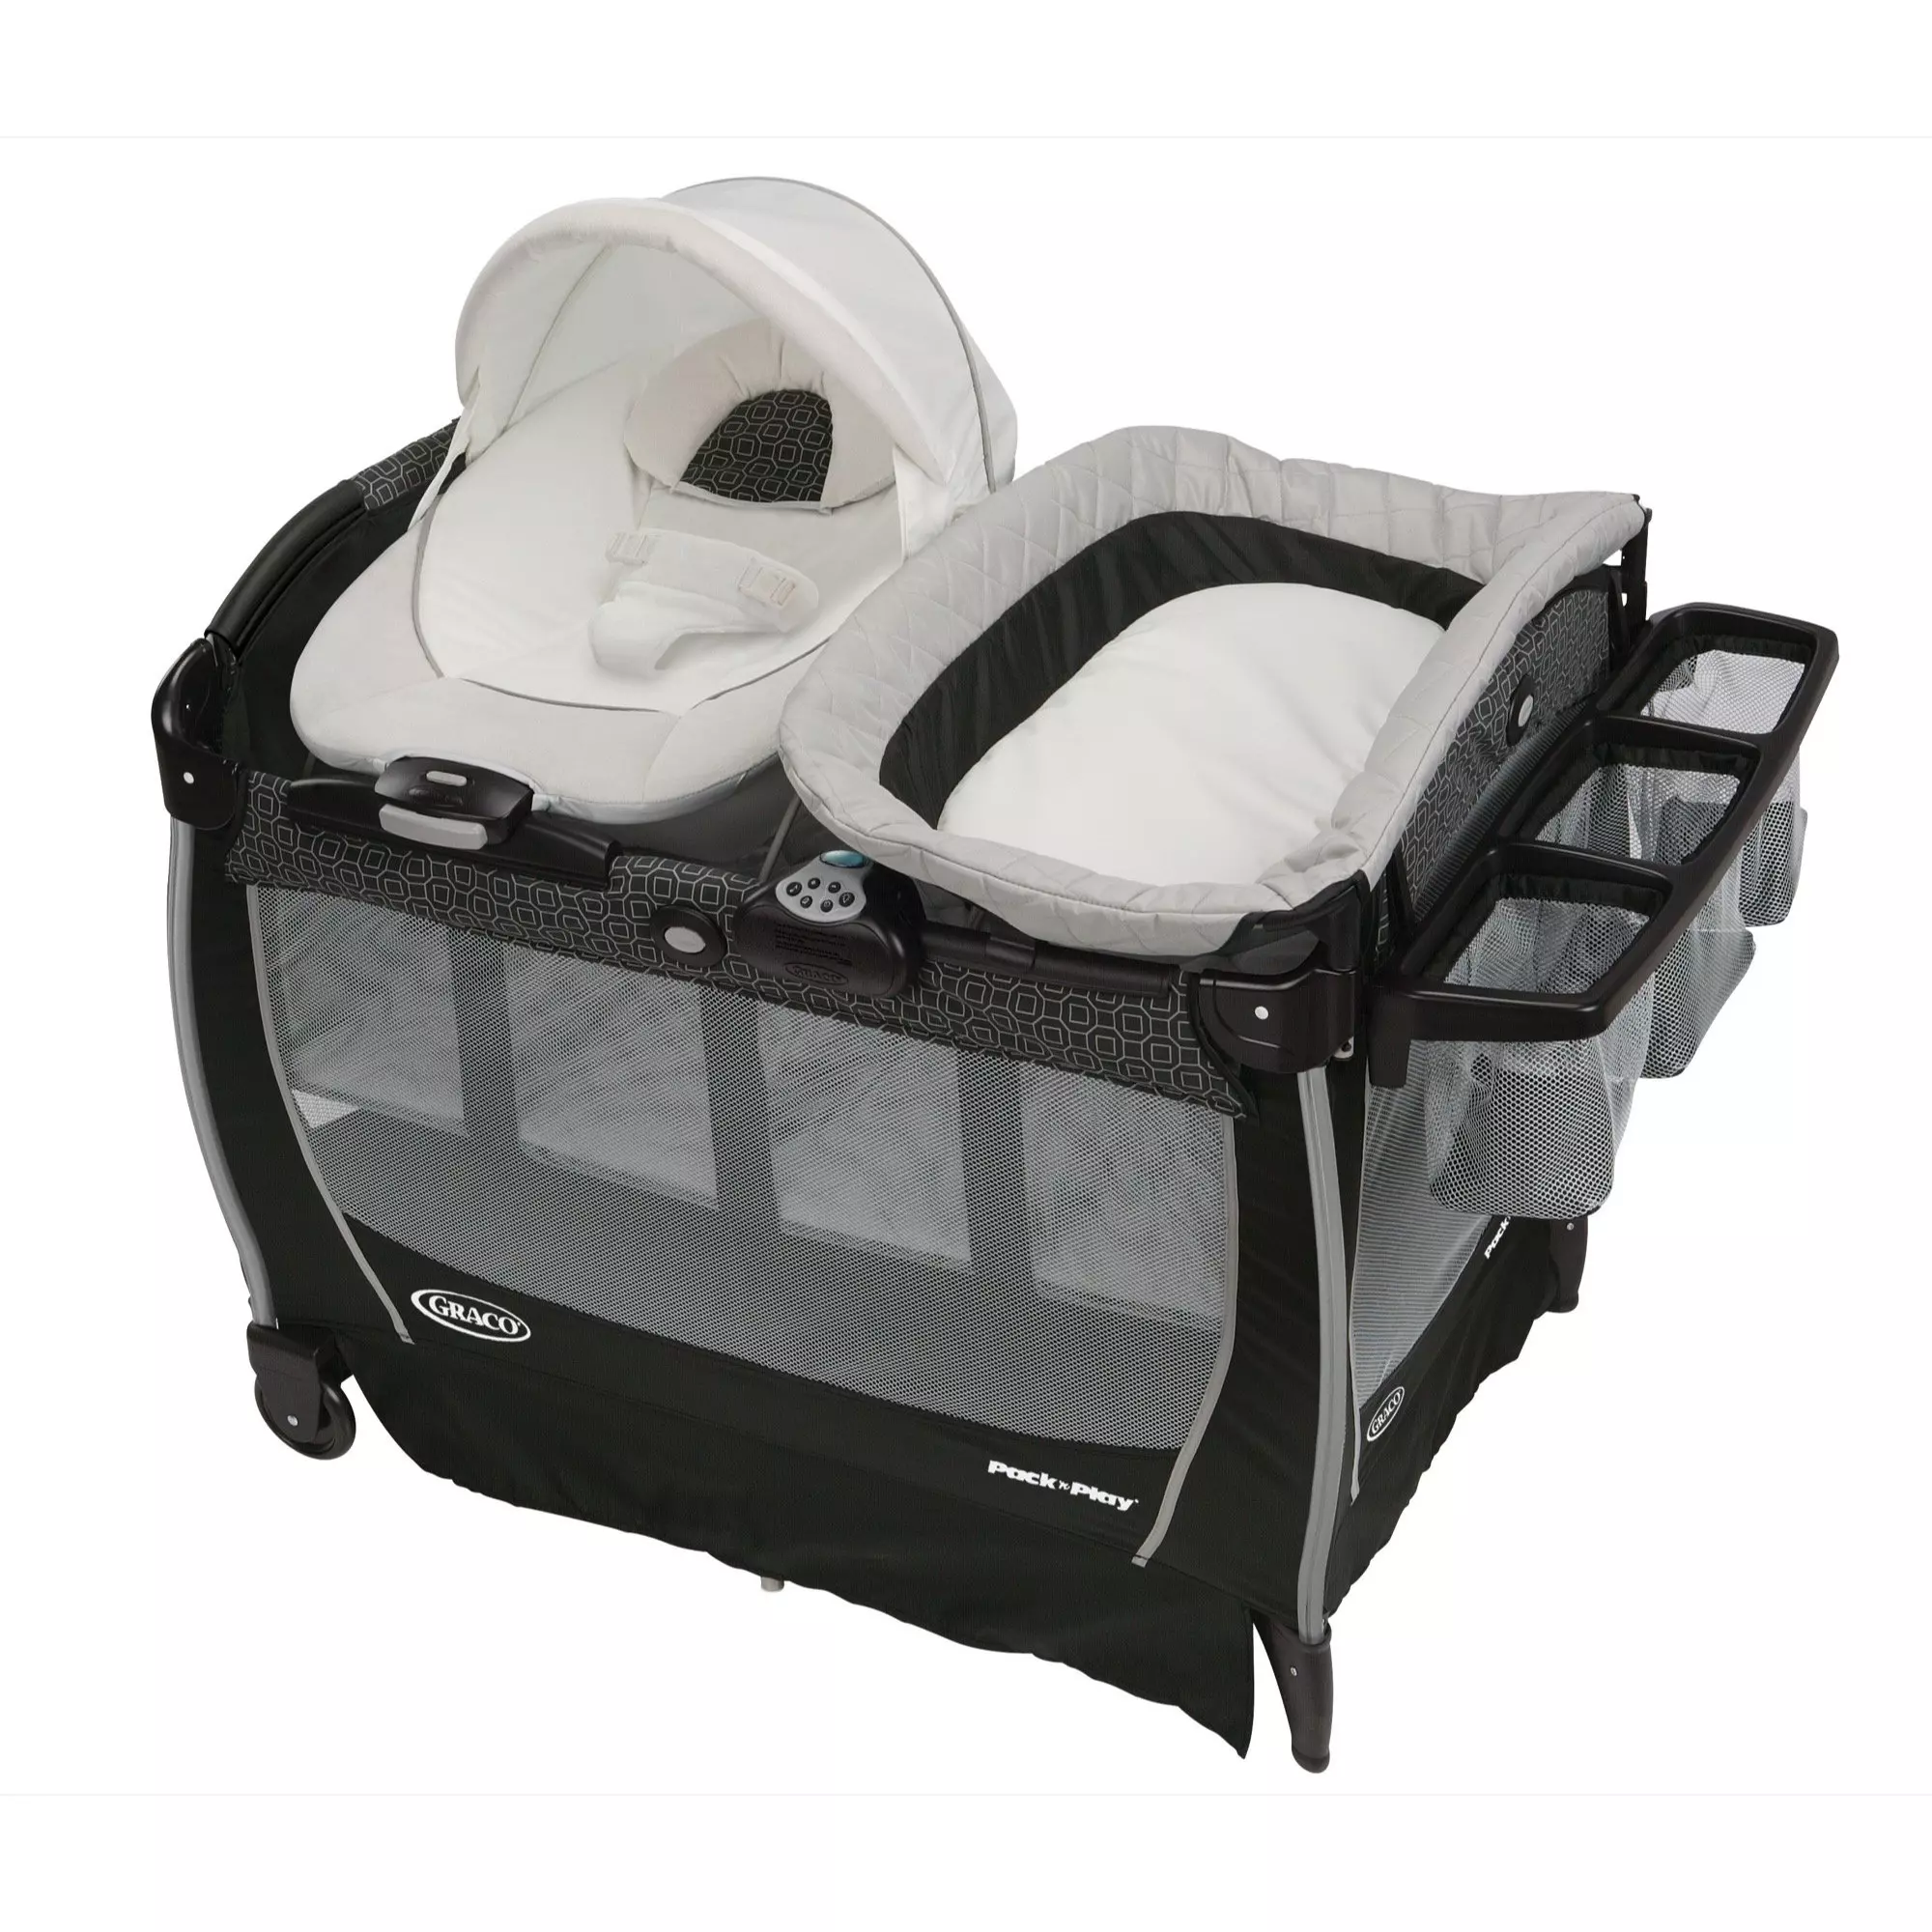 Graco Pack ‘n Play Playard with Cuddle Cove Removable Rocking Seat